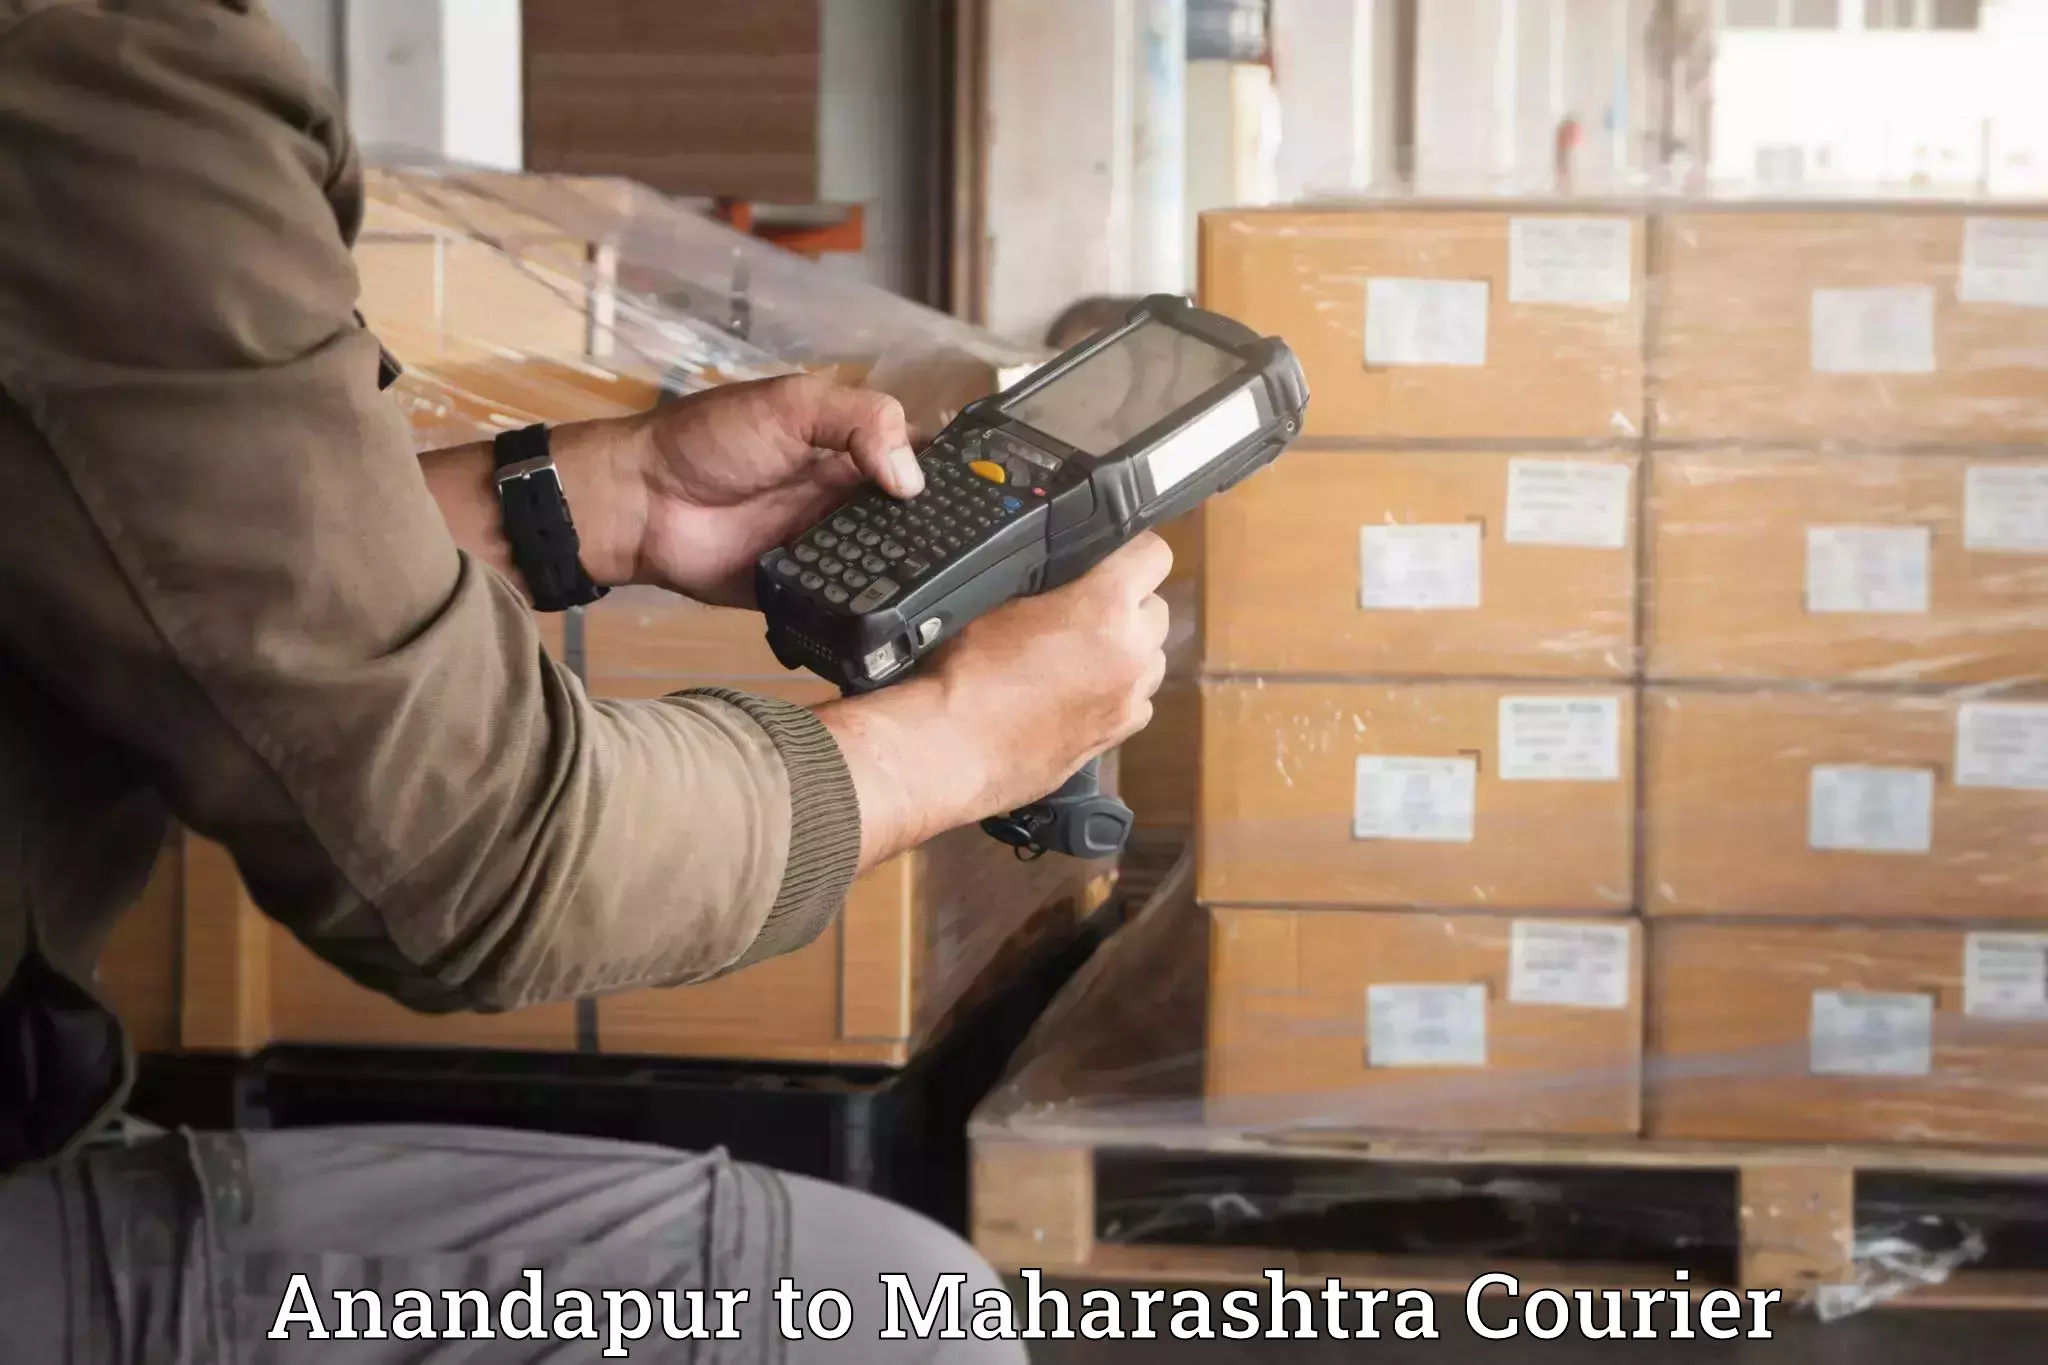 Quality moving and storage in Anandapur to Chiplun